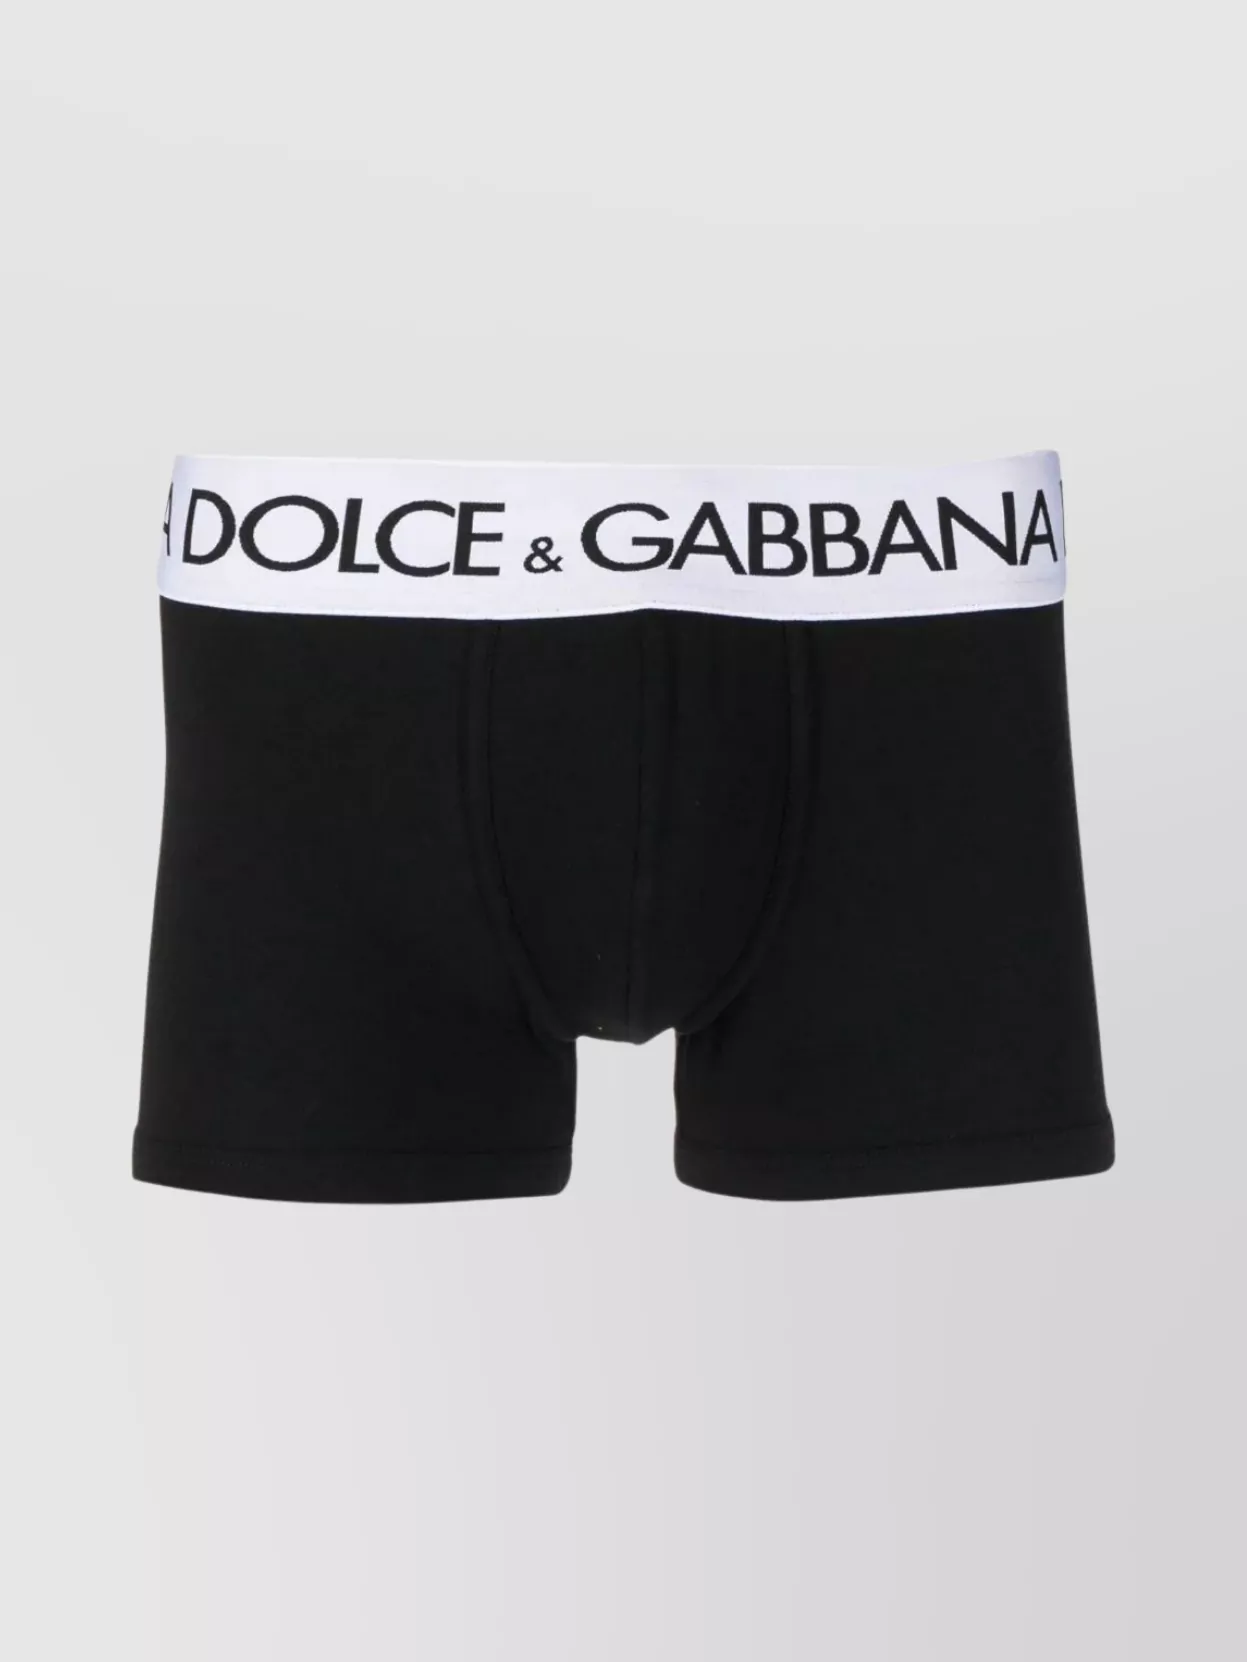 DOLCE & GABBANA LOGO-PRINTED STRETCH FIT BOXERS WITH SOFT WAISTBAND